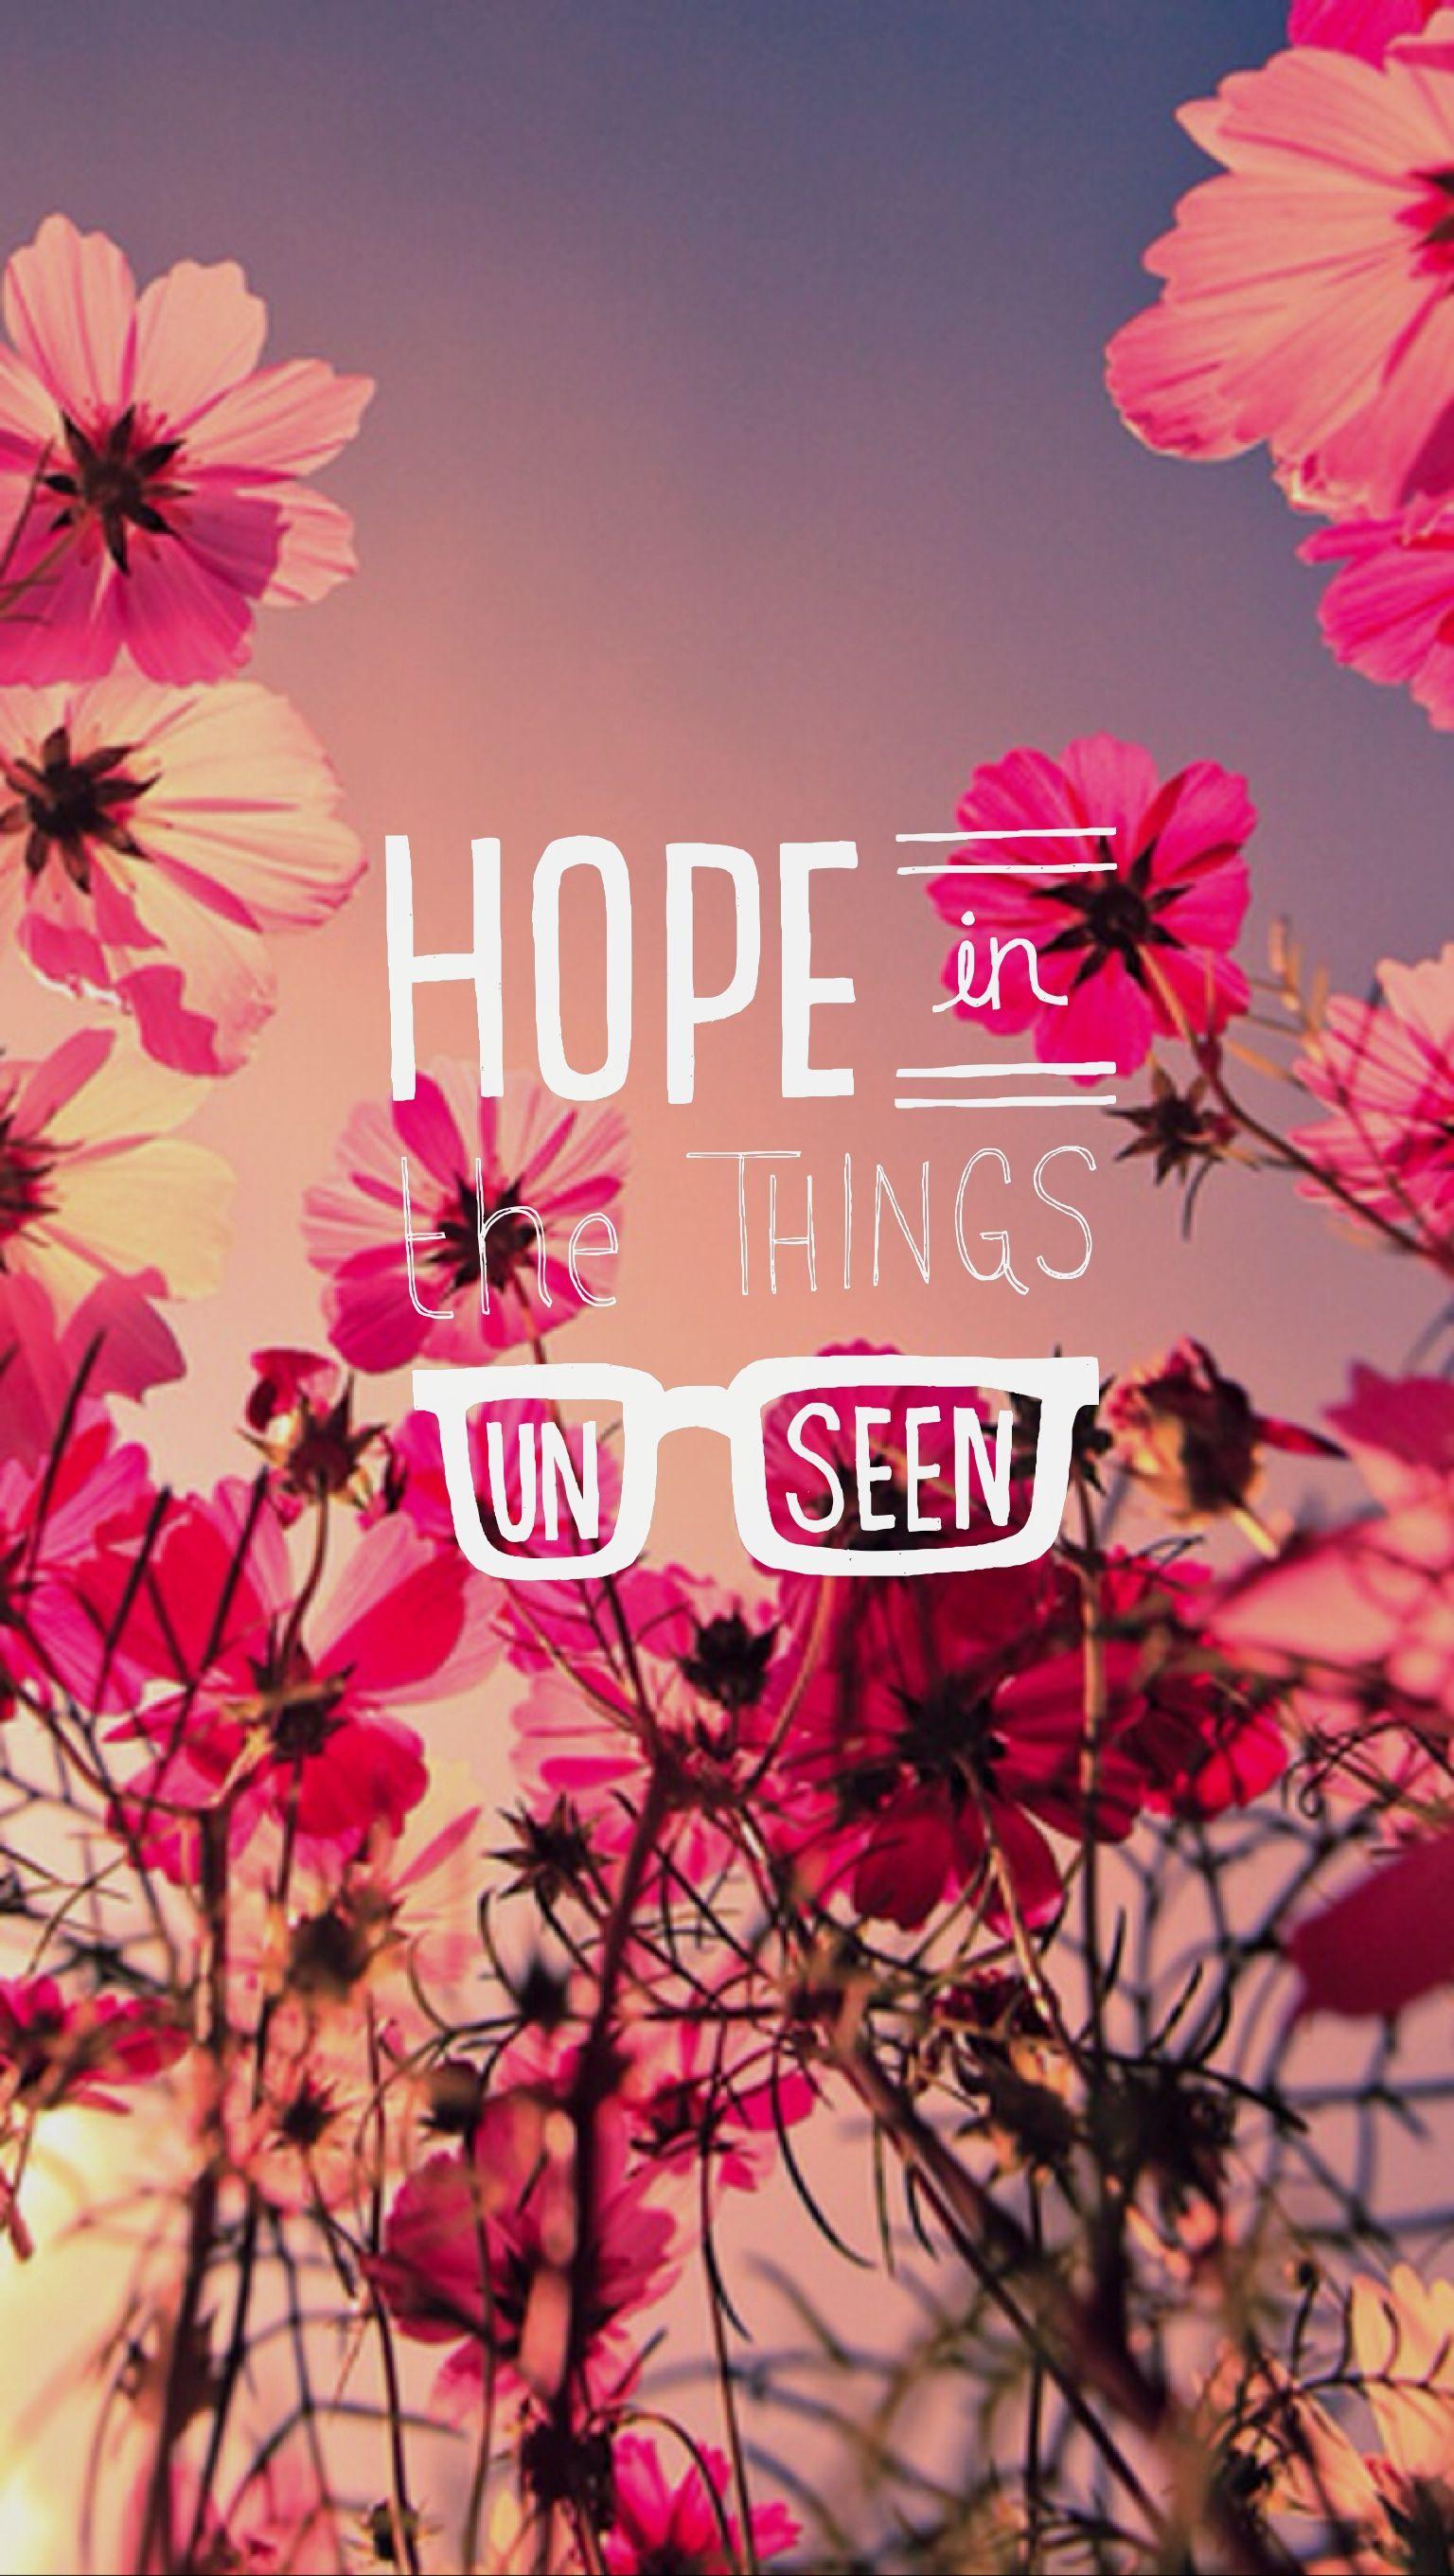 It's pink and have flowers on it quotes wallpaper